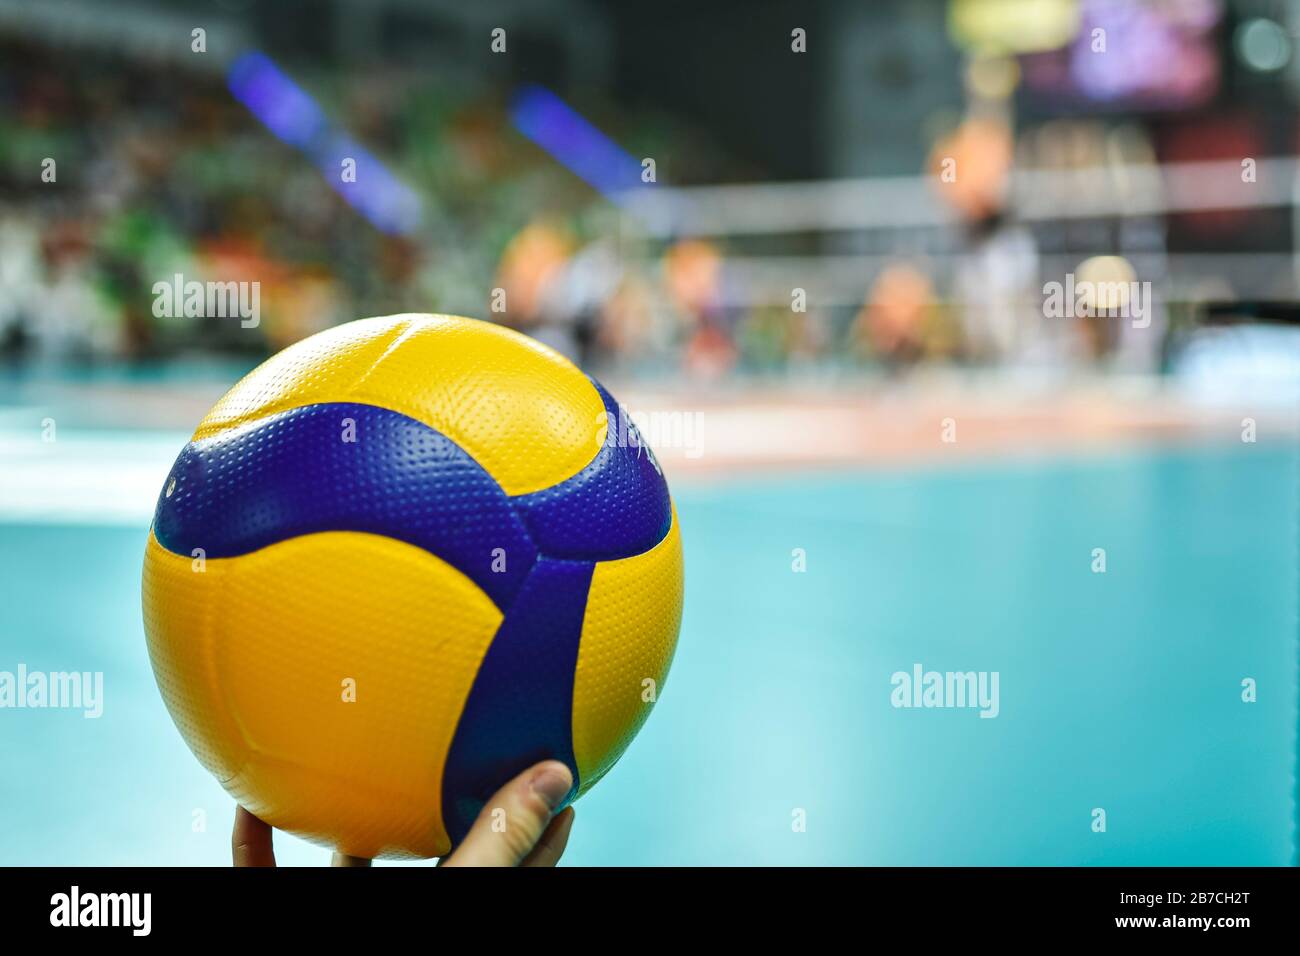 Volleyball ball with playing field in the background. Stock Photo